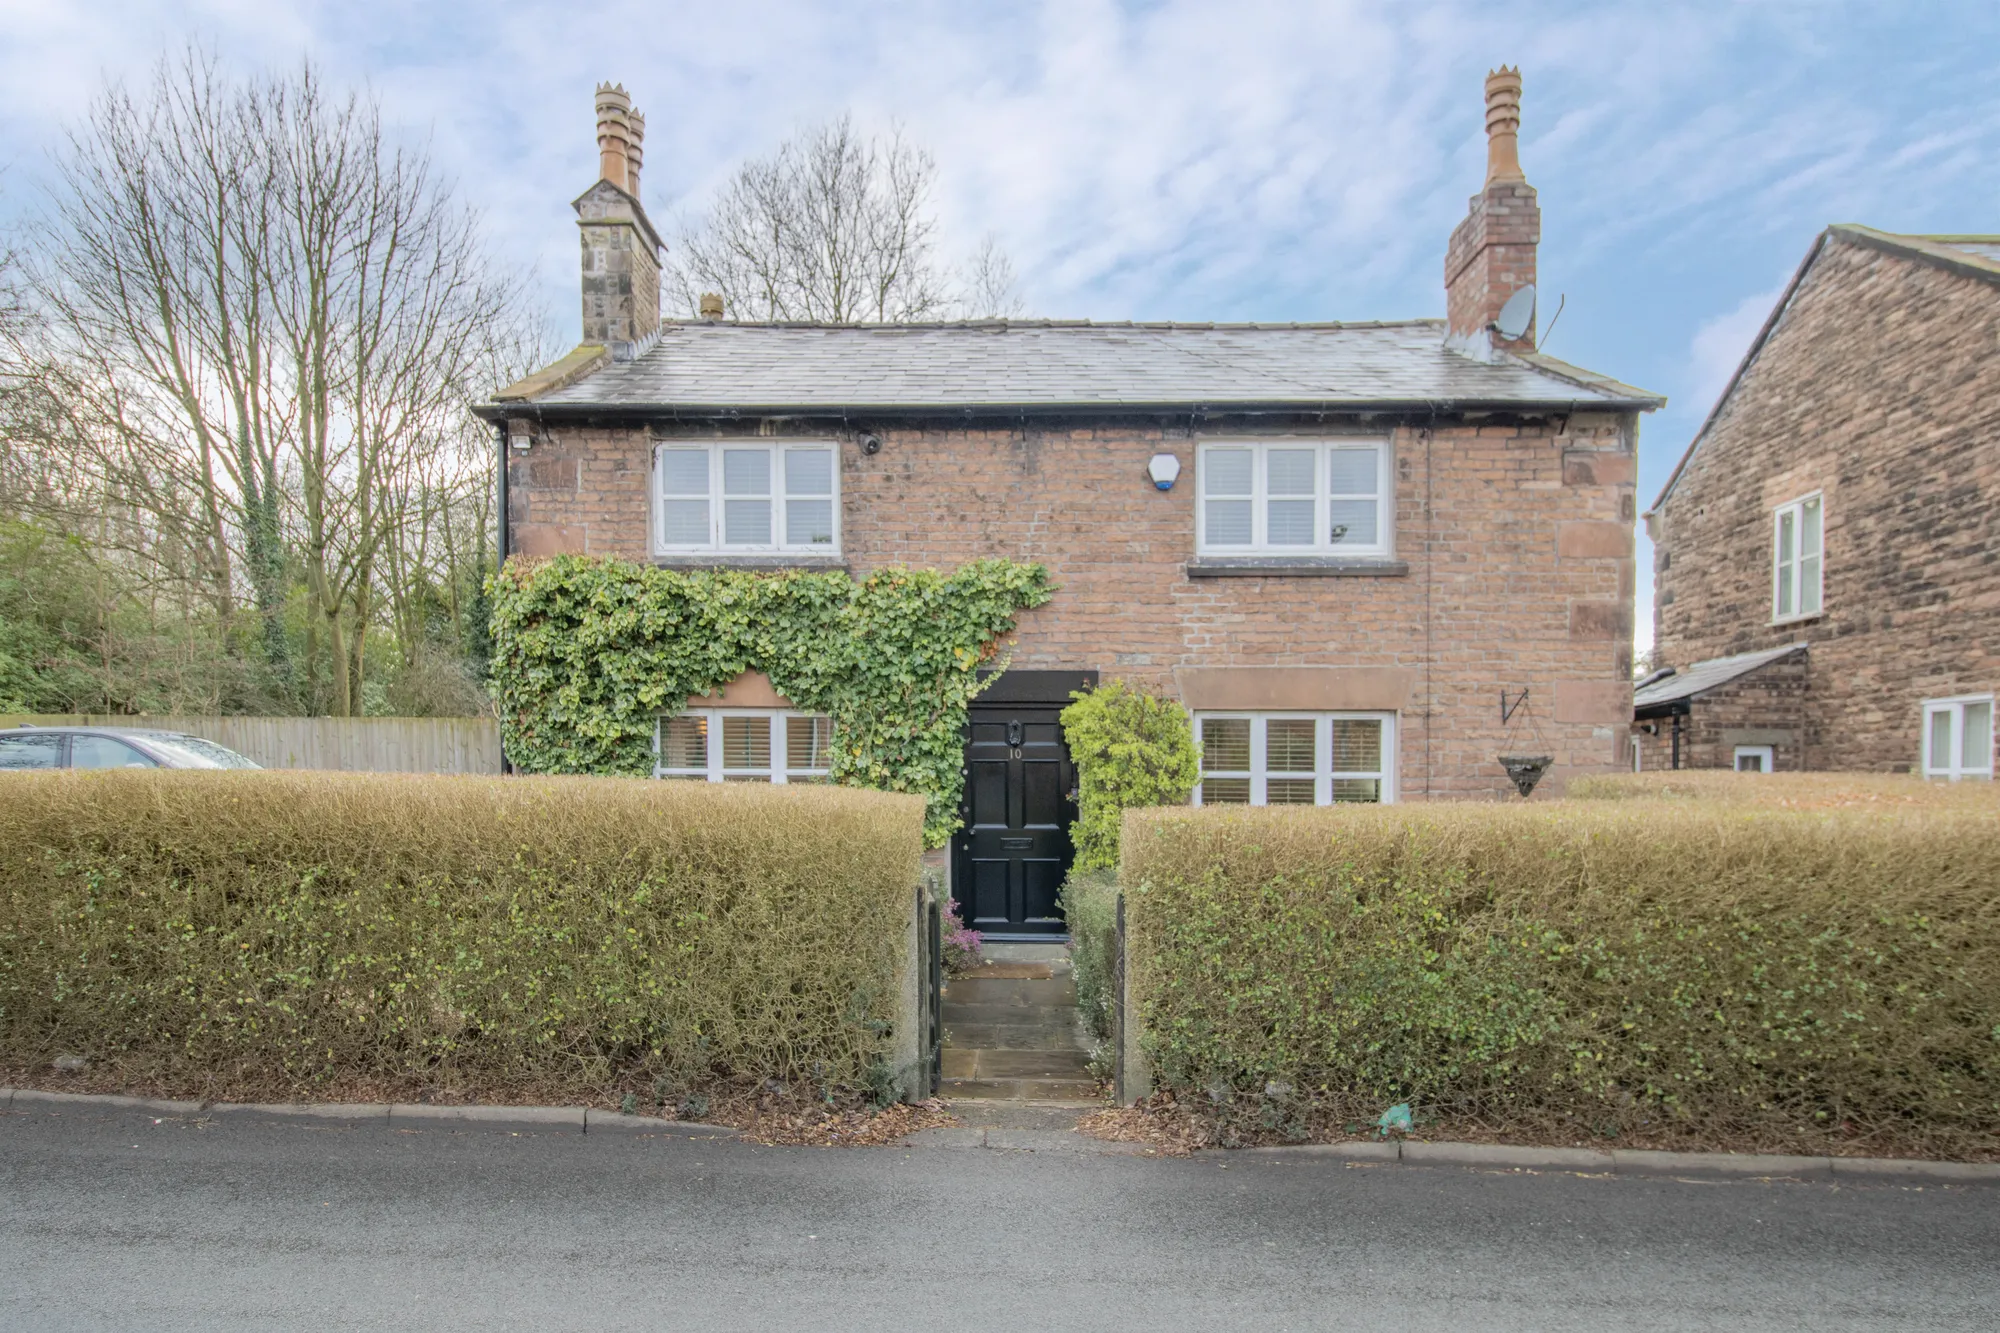 Discover a characterful 4-bed, 4-rec cottage in Knowsley Village's Derby Estate. Renovated in 2003 with country kitchen including an AGA, ample parking, and a sizable garden. No chain. Viewing recommended to appreciate its charm and space.